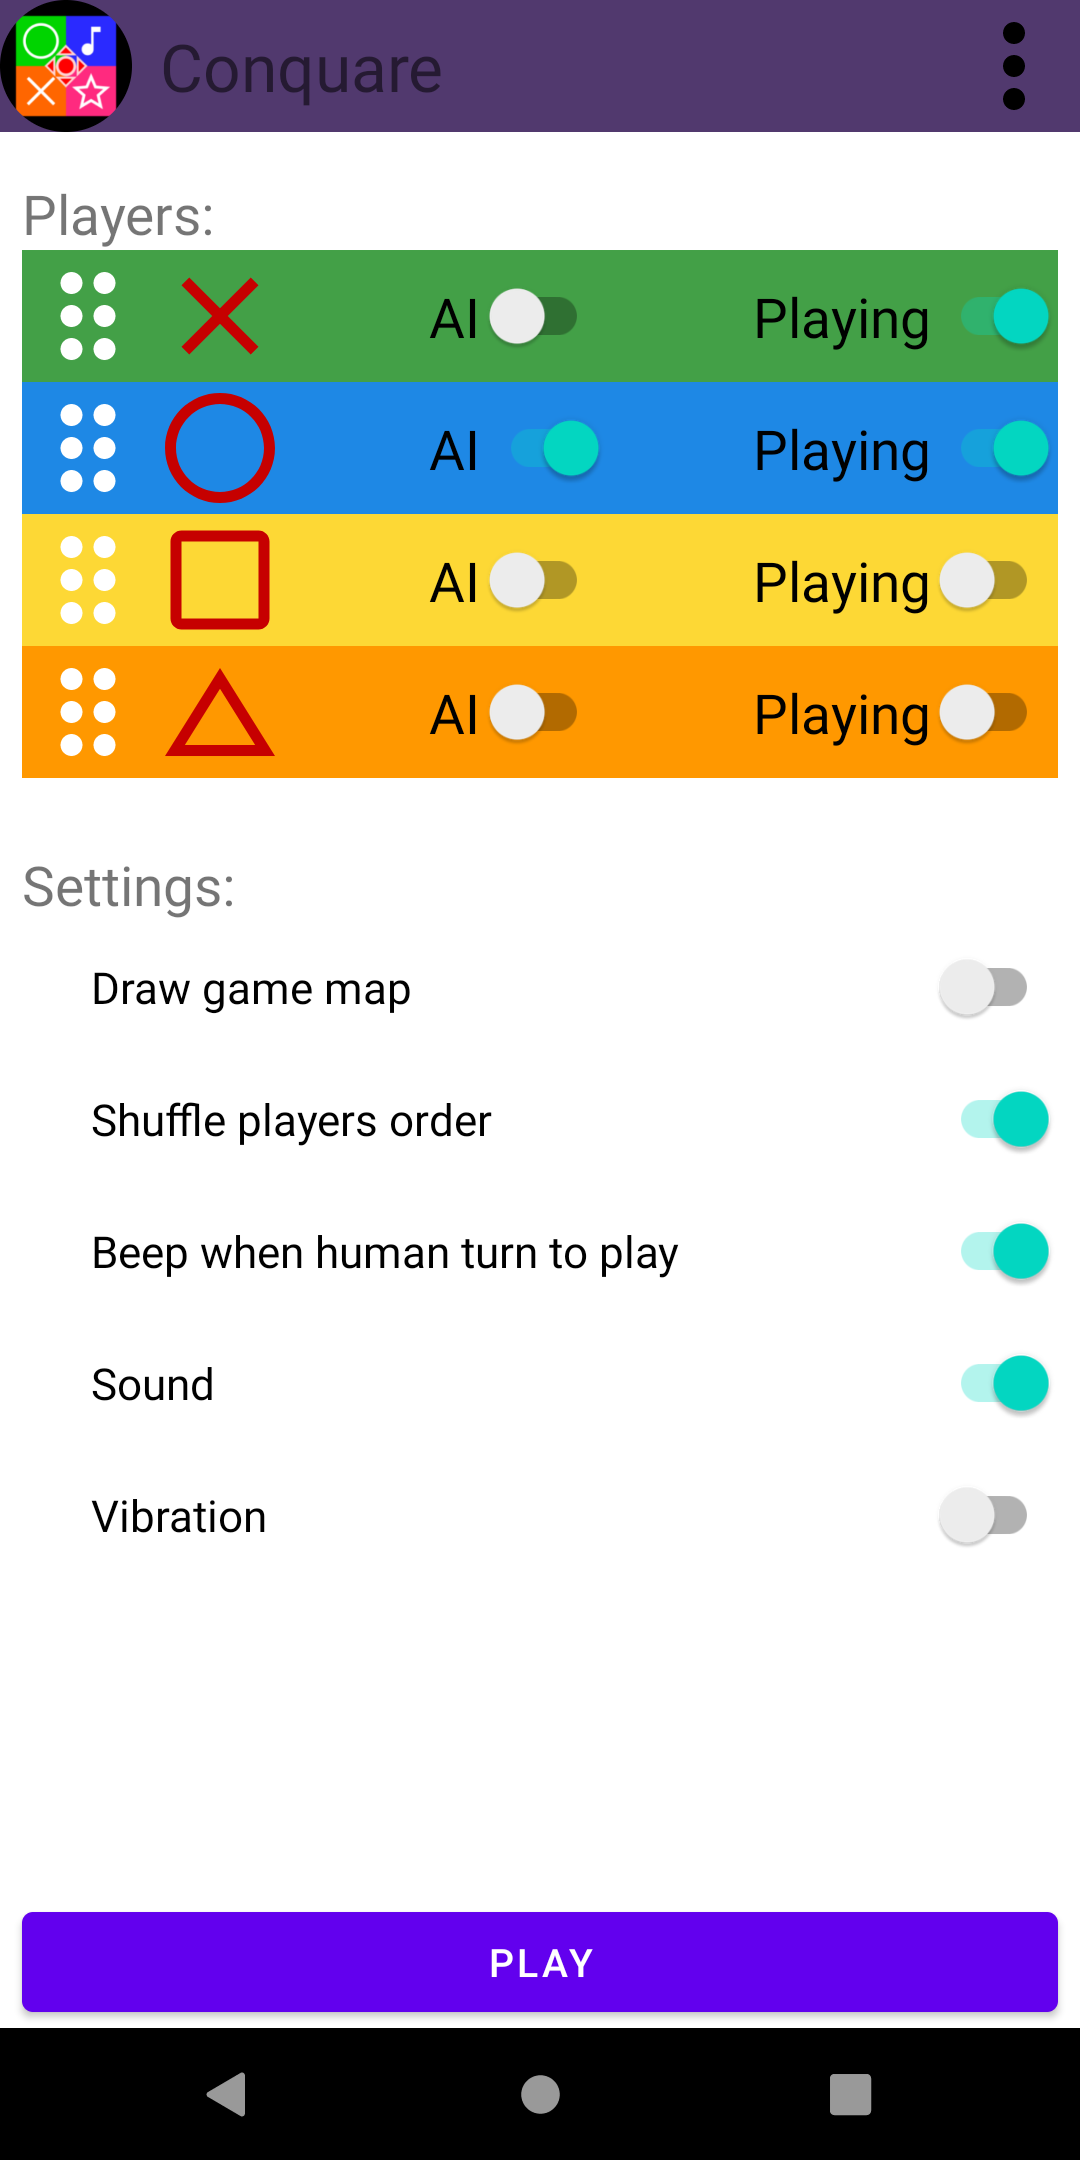 Oof Sounds Button for Android - Download